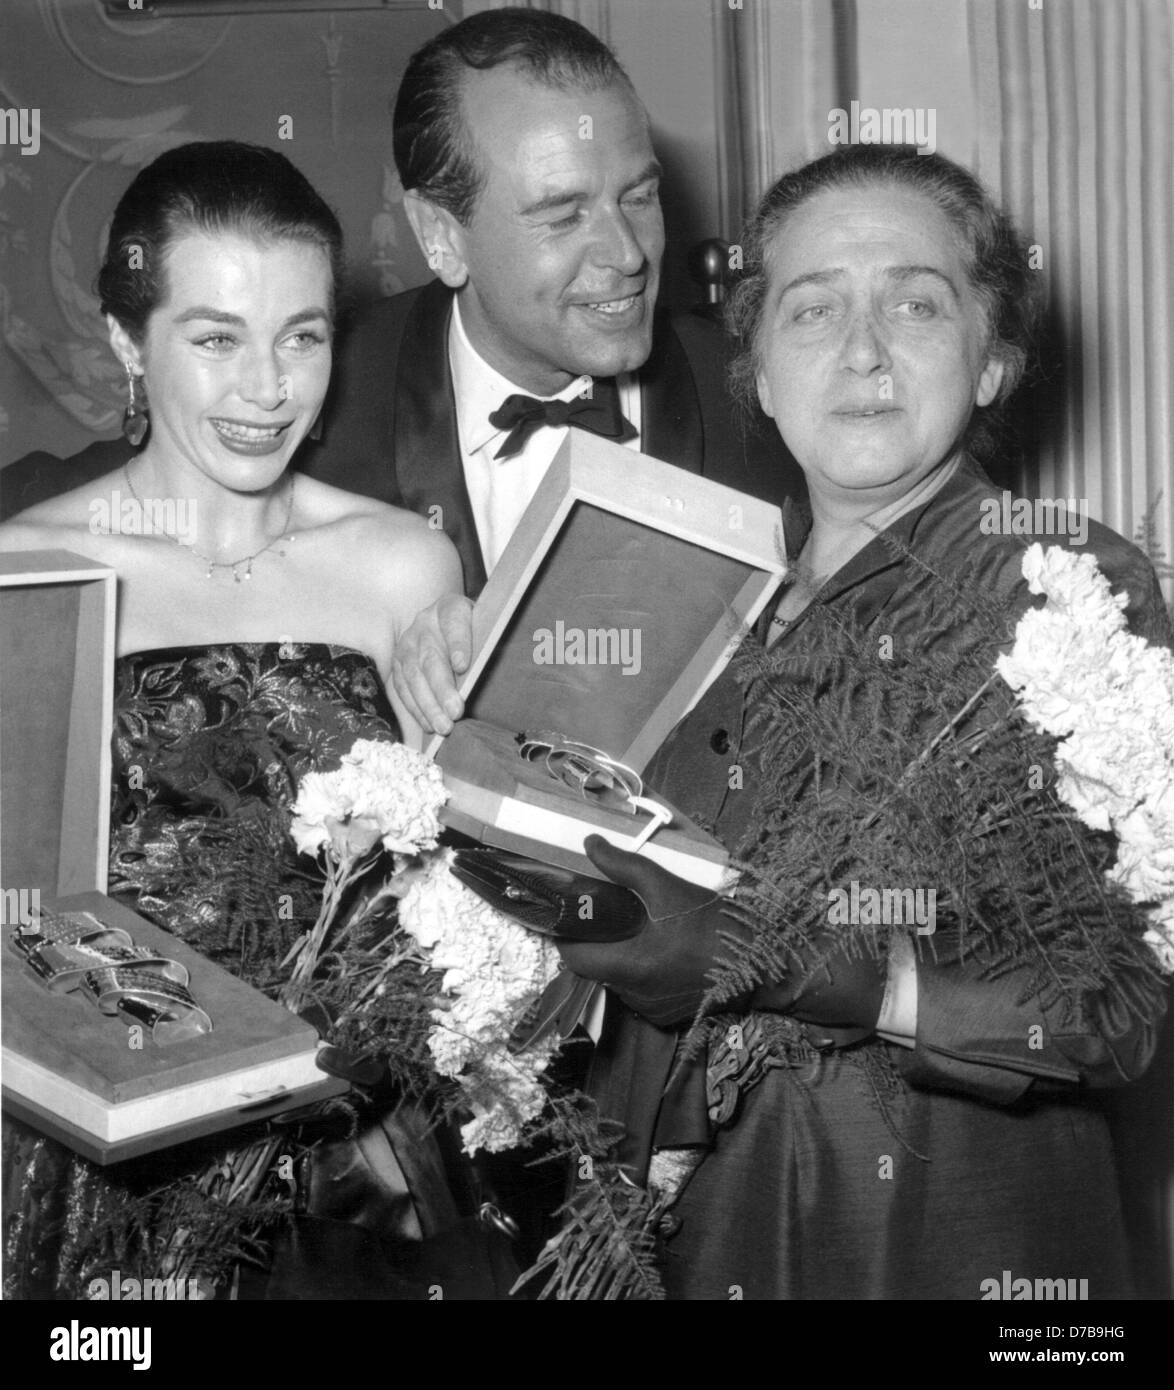 Marianne Koch, O.W. Fischer and Therese Giehse (l-r) receive the Silver Tape during the International Film Festival 1955 in Berlin. Stock Photo